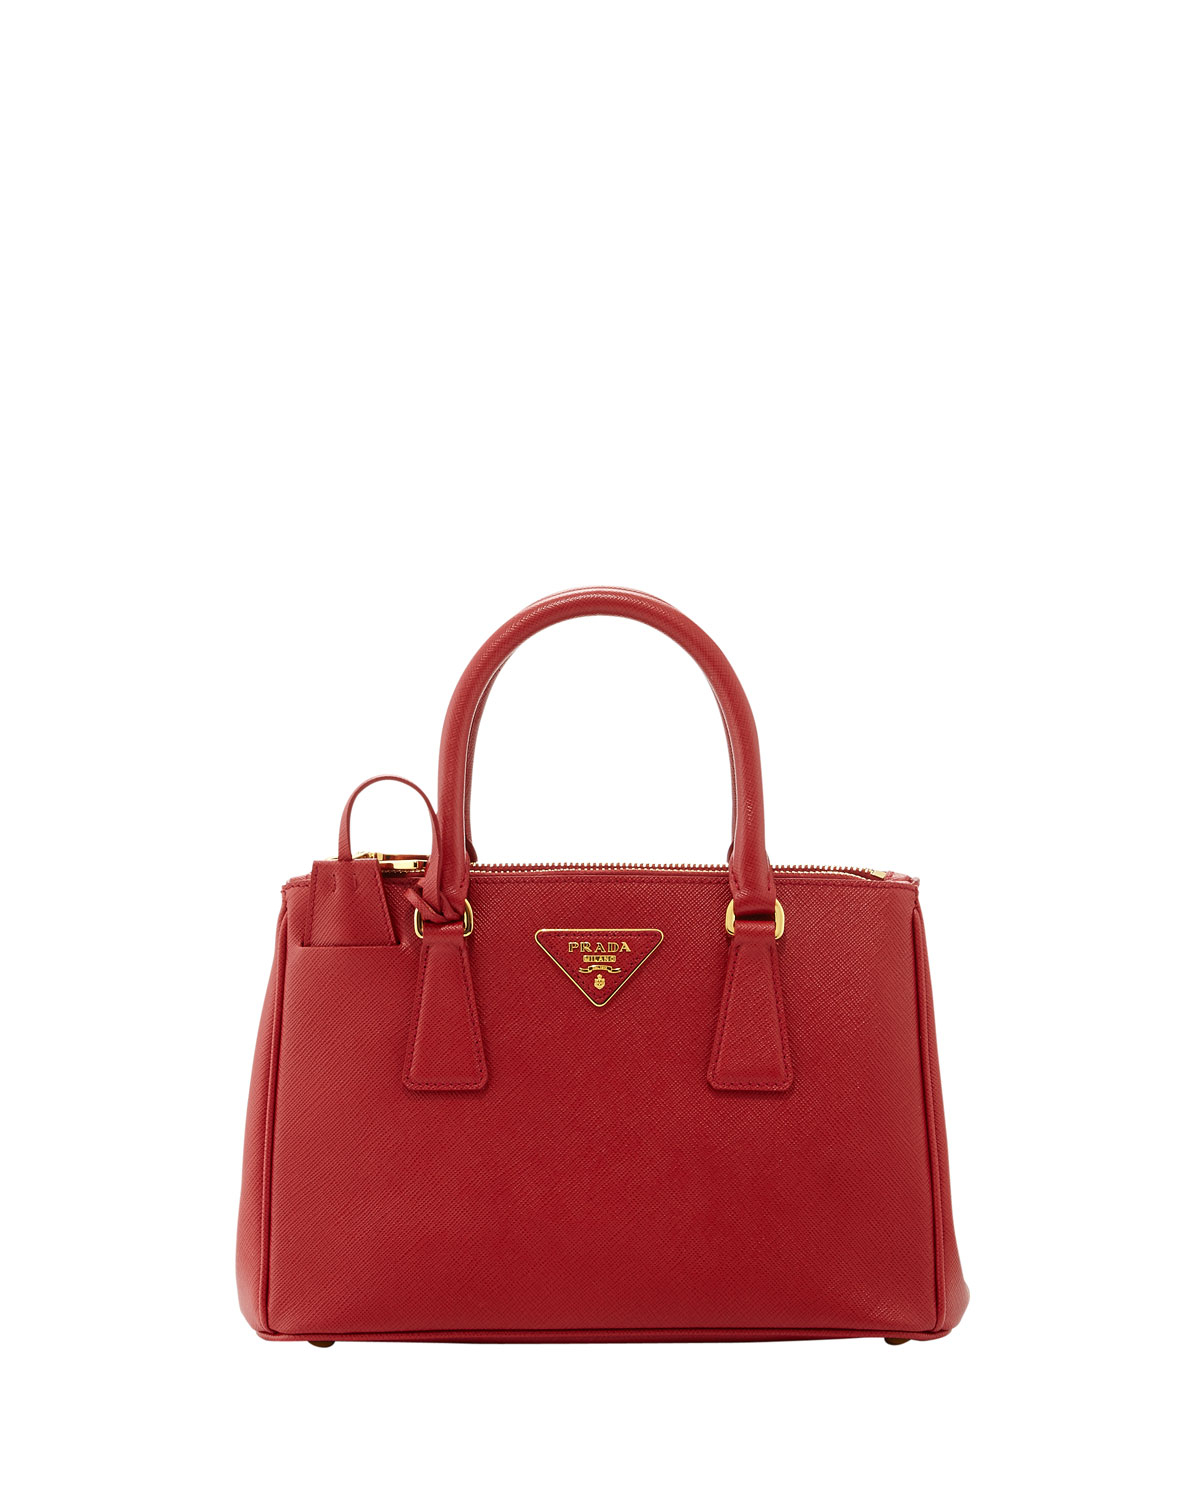 Prada Saffiano Baby Executive Tote Bag With Strap in Red | Lyst  